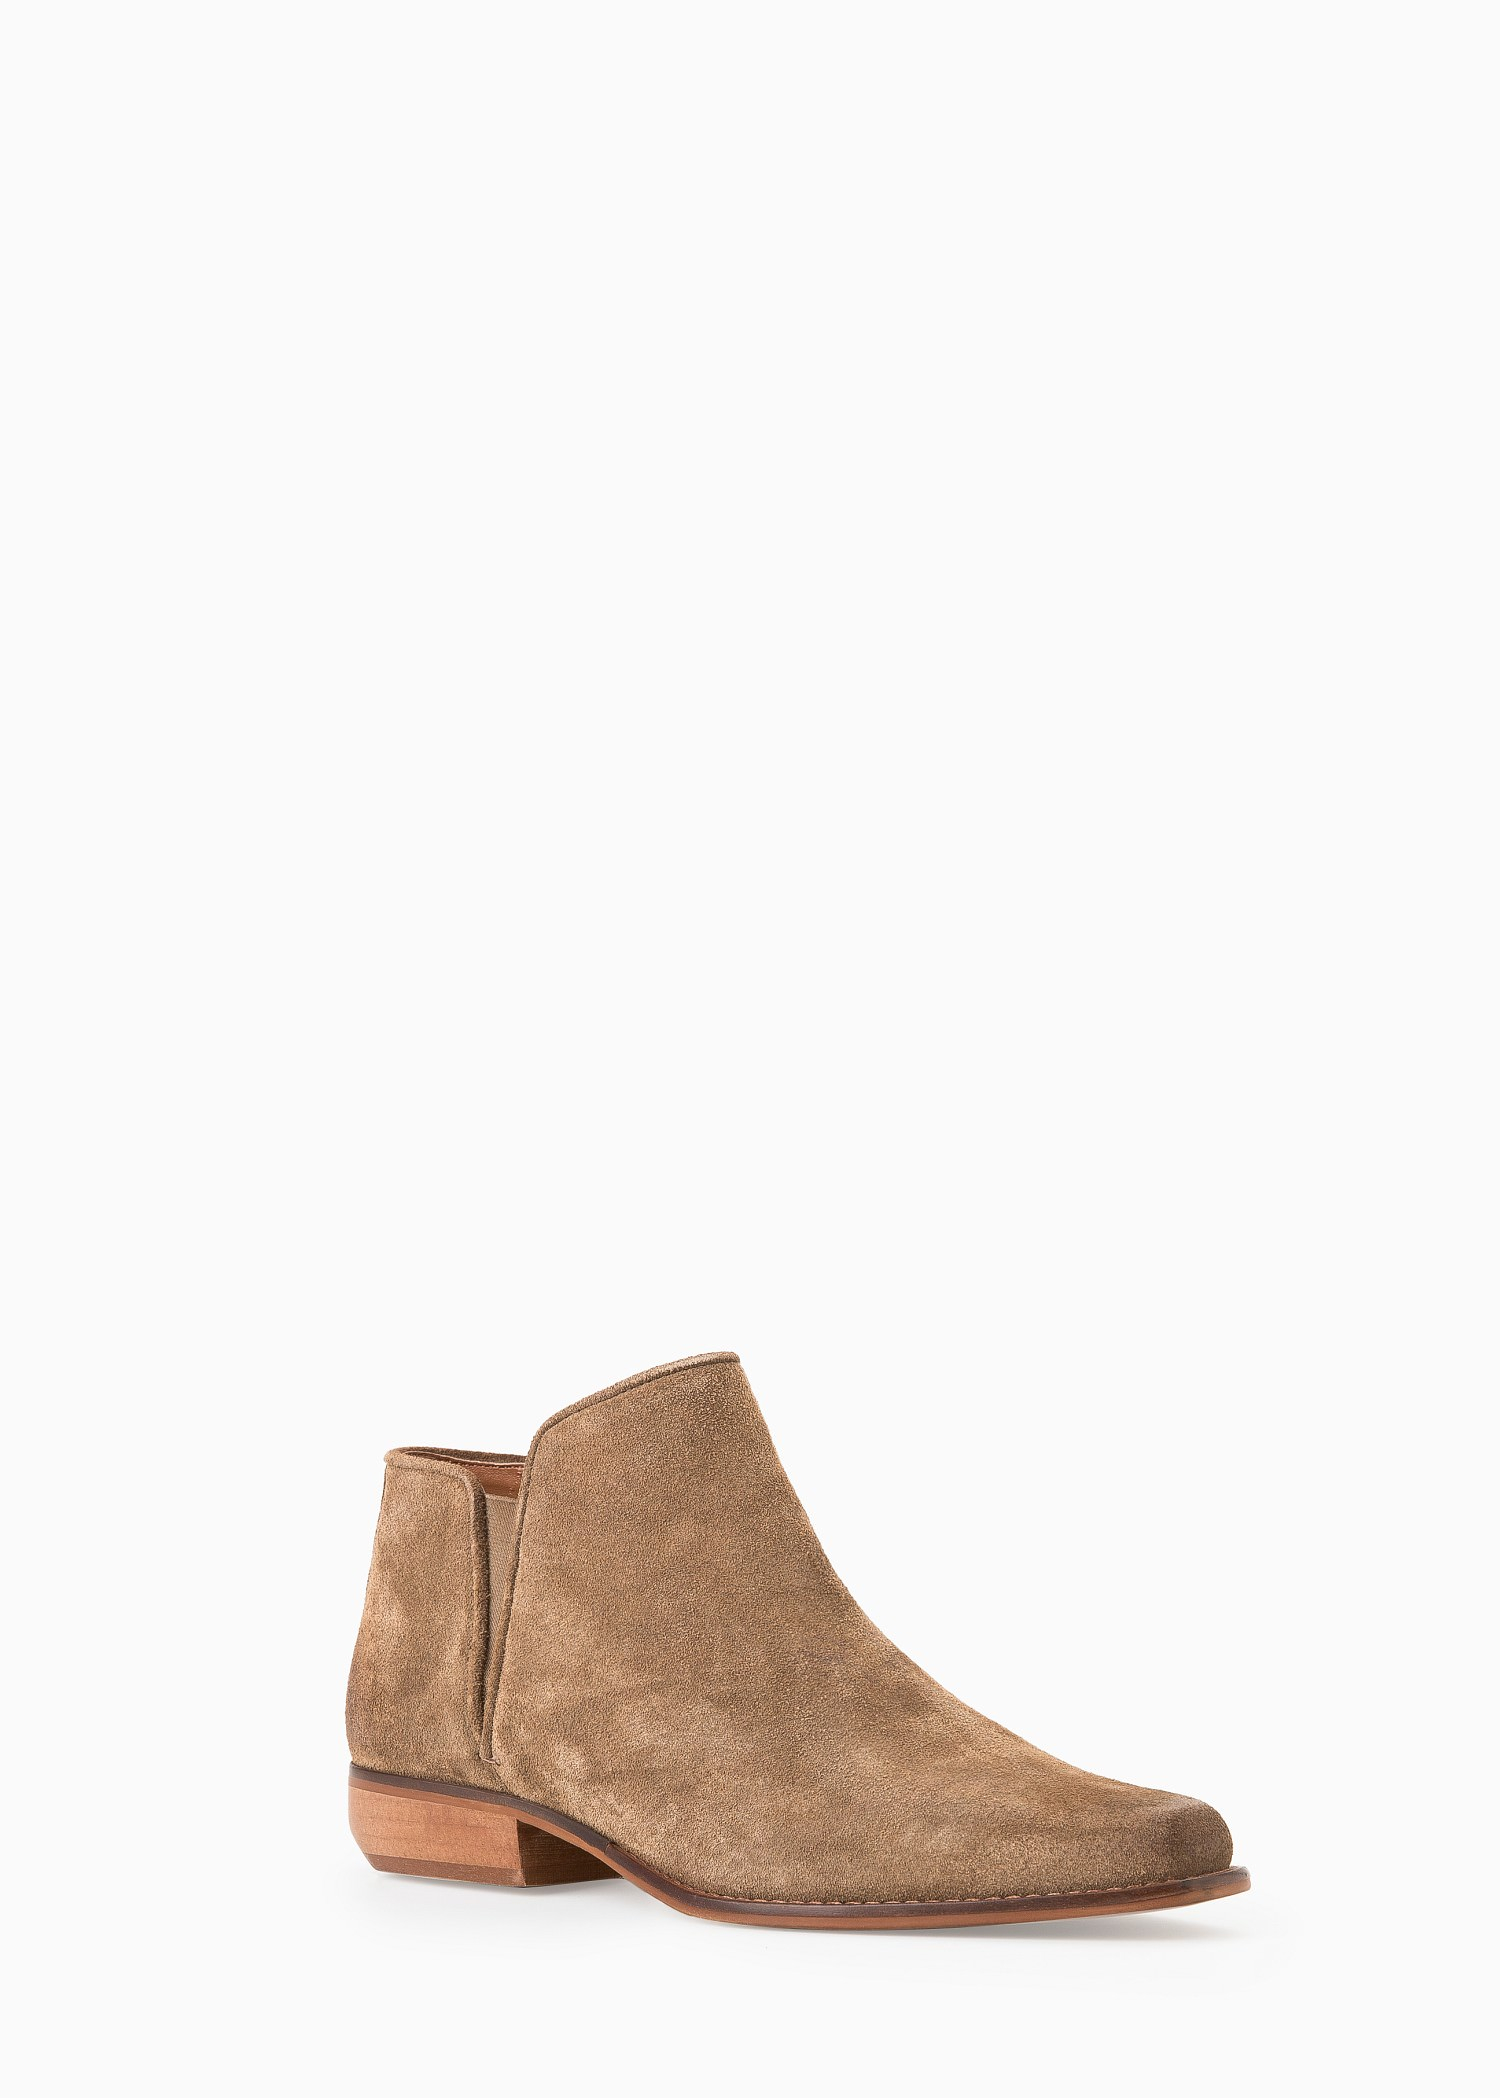 Mango Flat Suede Ankle Boots in Sand 